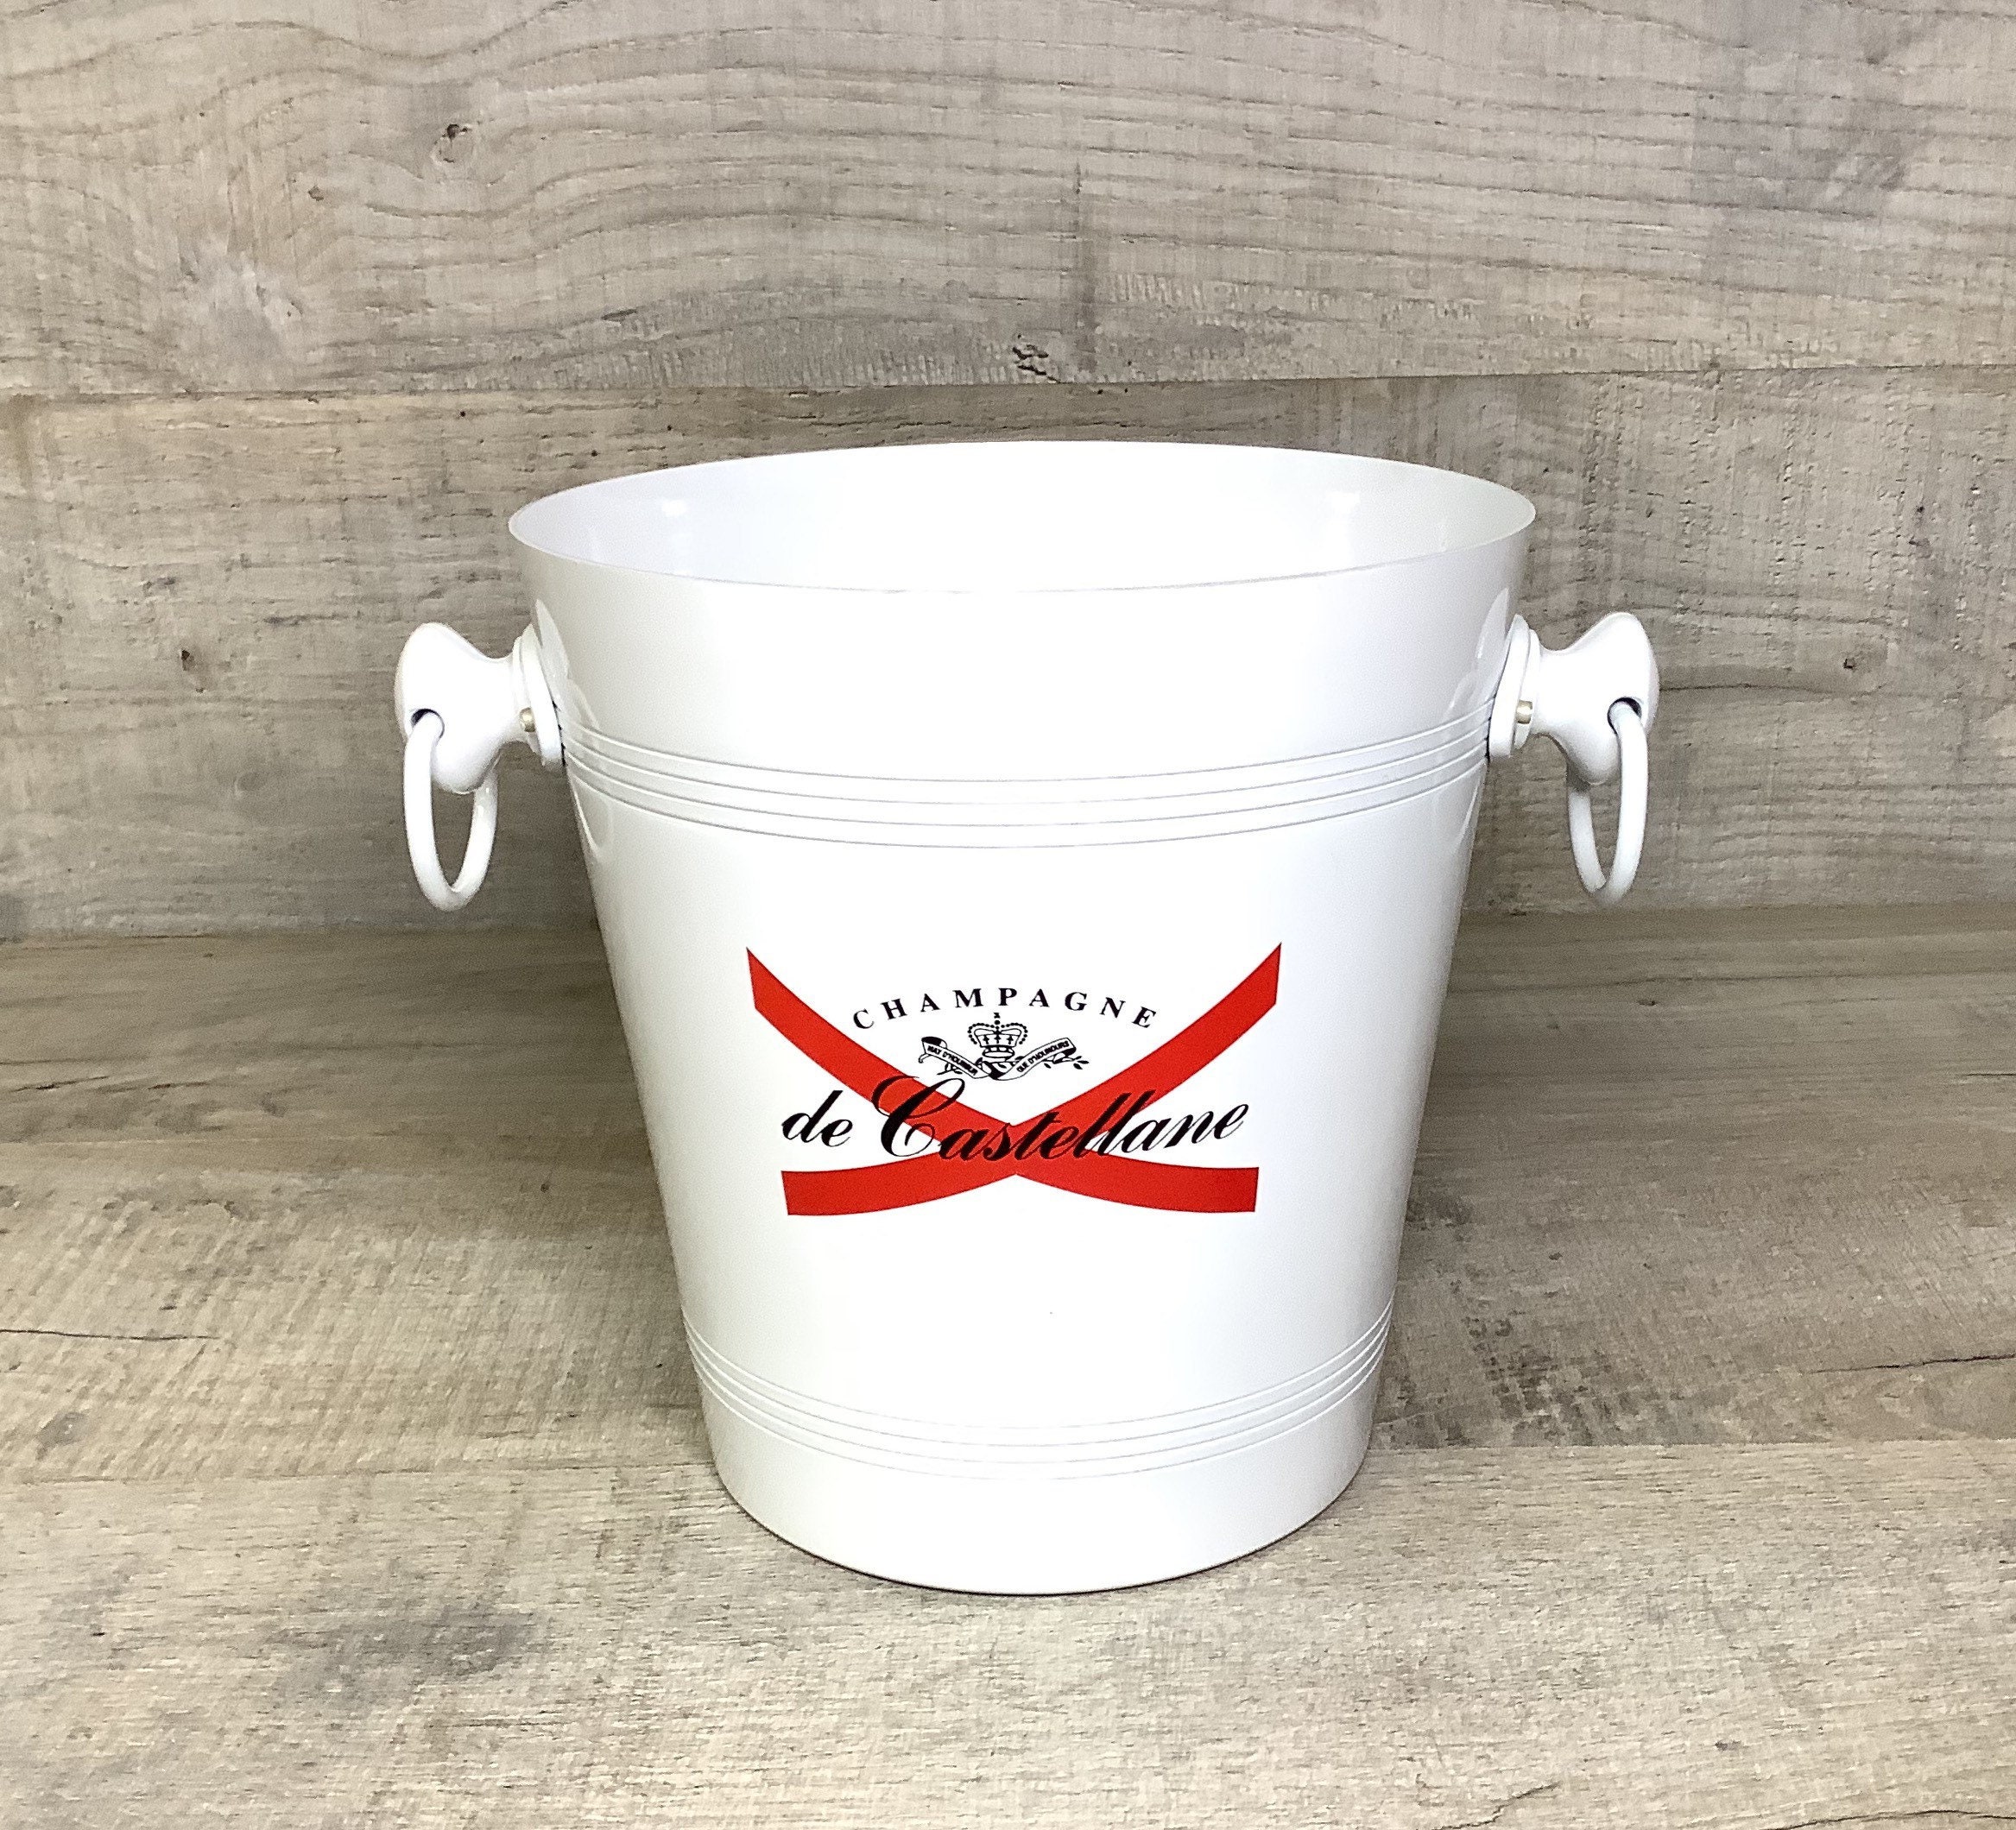 Seau à Champagne de Castellane/ Mint/Champagne Ice Bucket From Mint/Cooler Vintage Champagne Made in